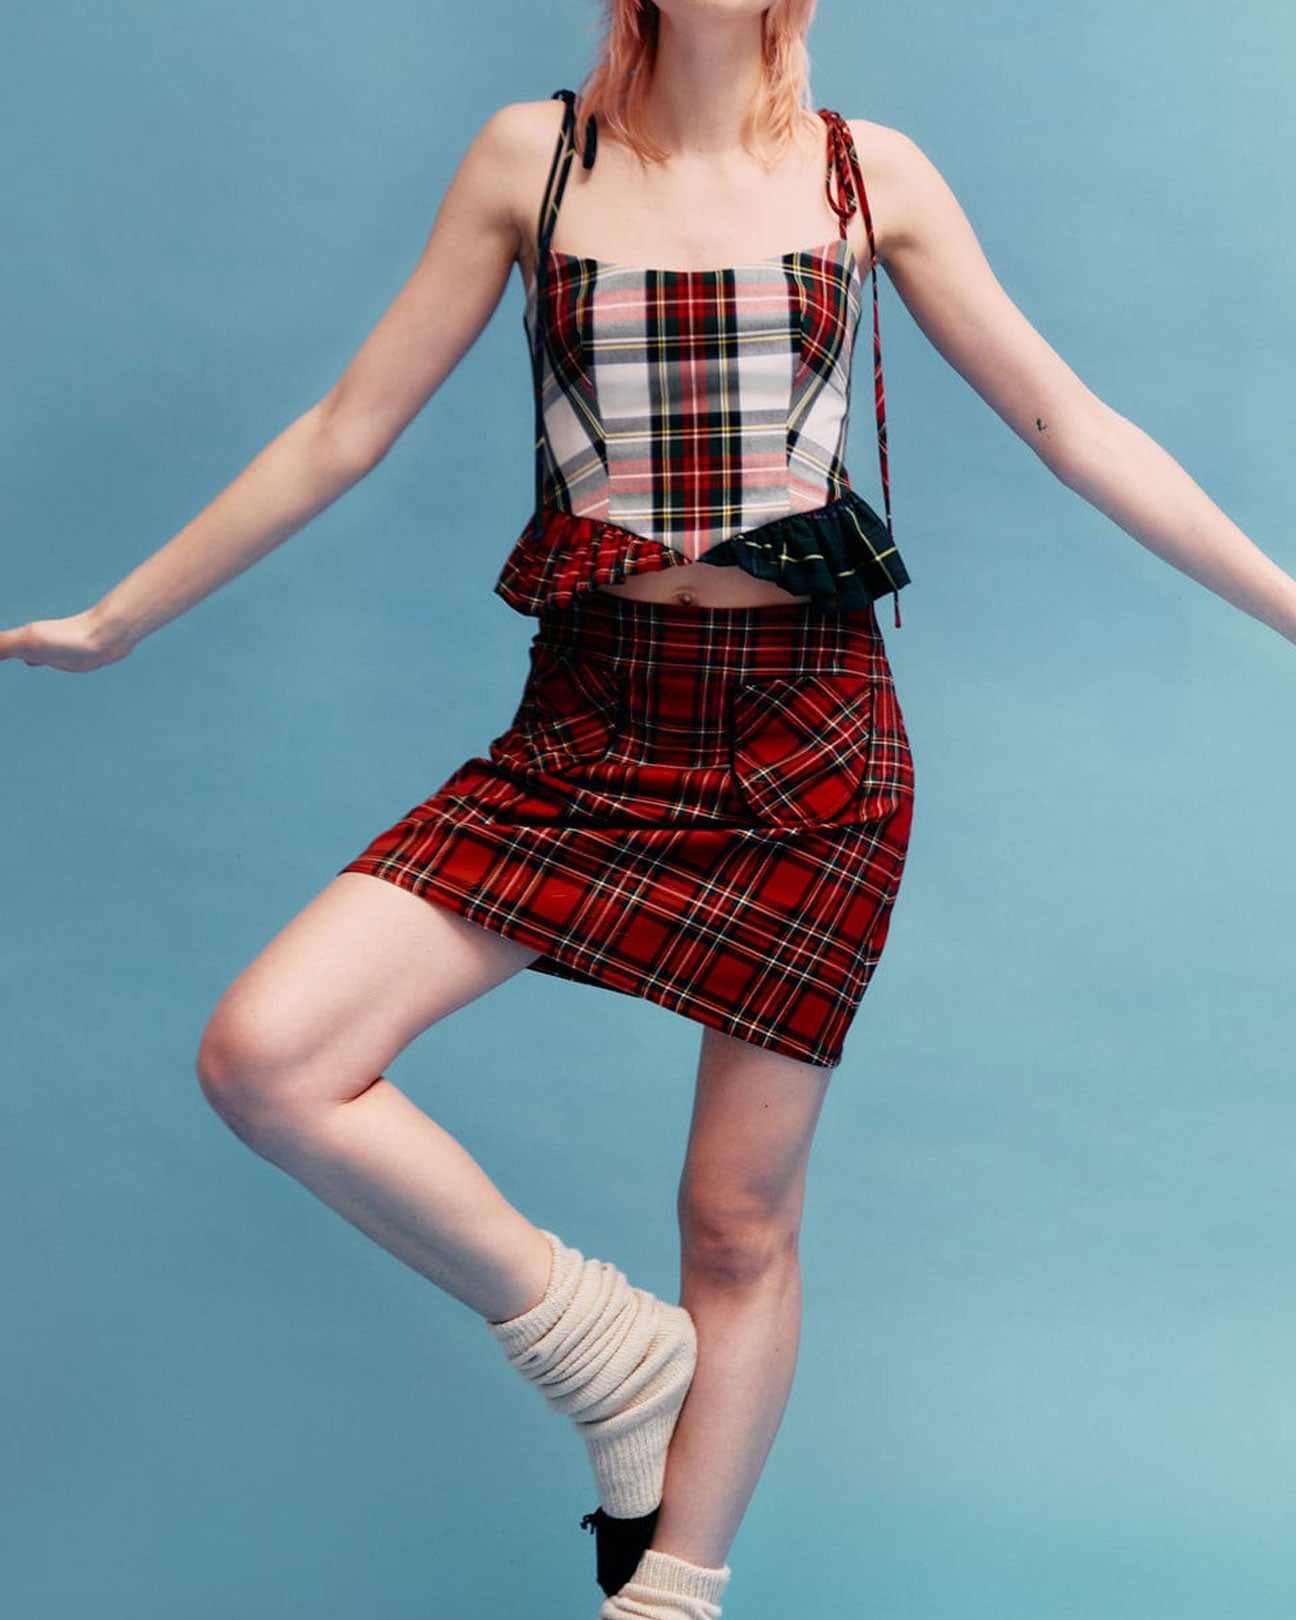 ELIZA FAULKNER Candy Corset in White Plaid Mix available at Lahn.shop